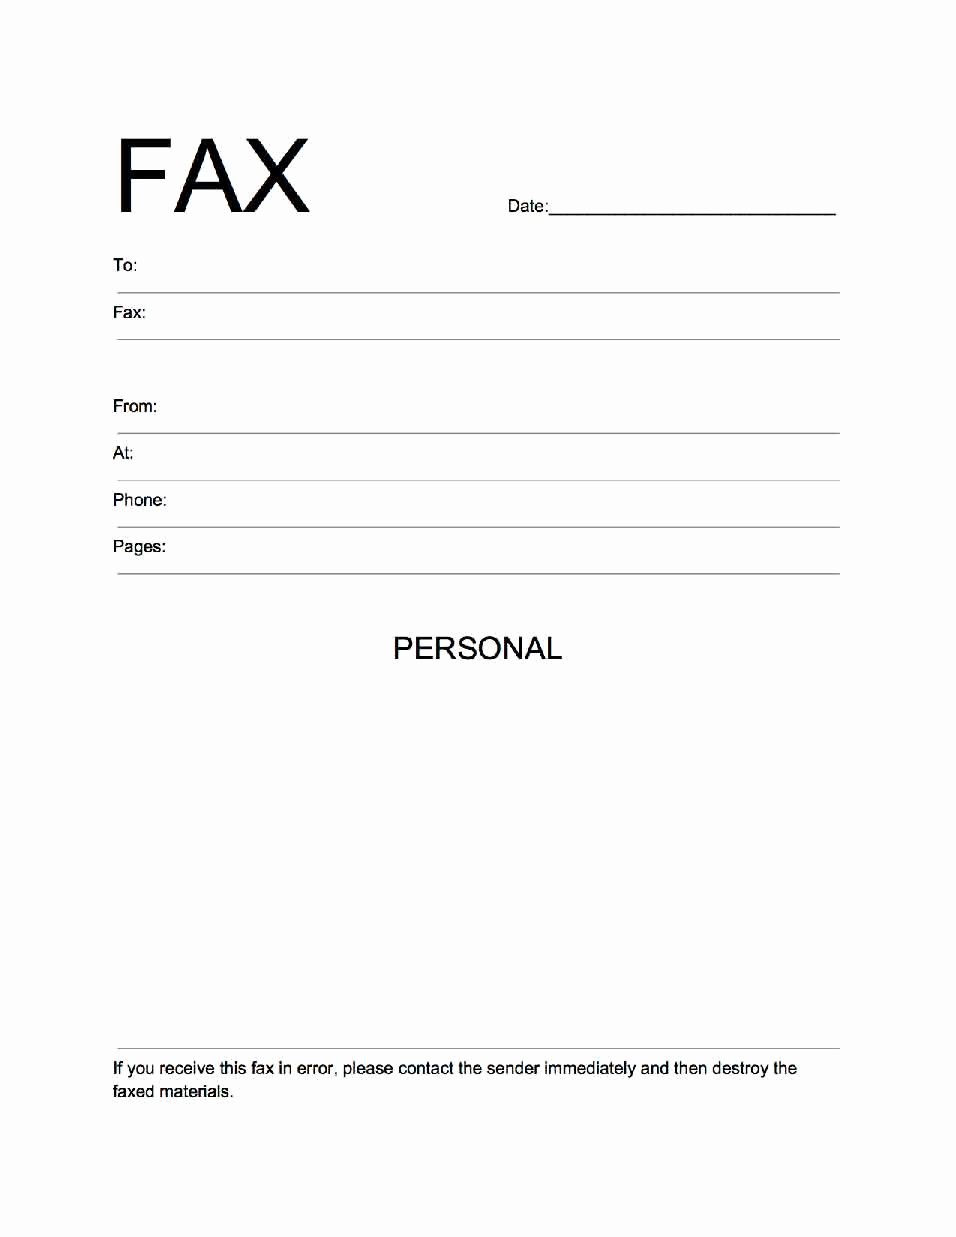 Sample Of Fax Cover Sheets Elegant Personal Fax Cover Sheet Template